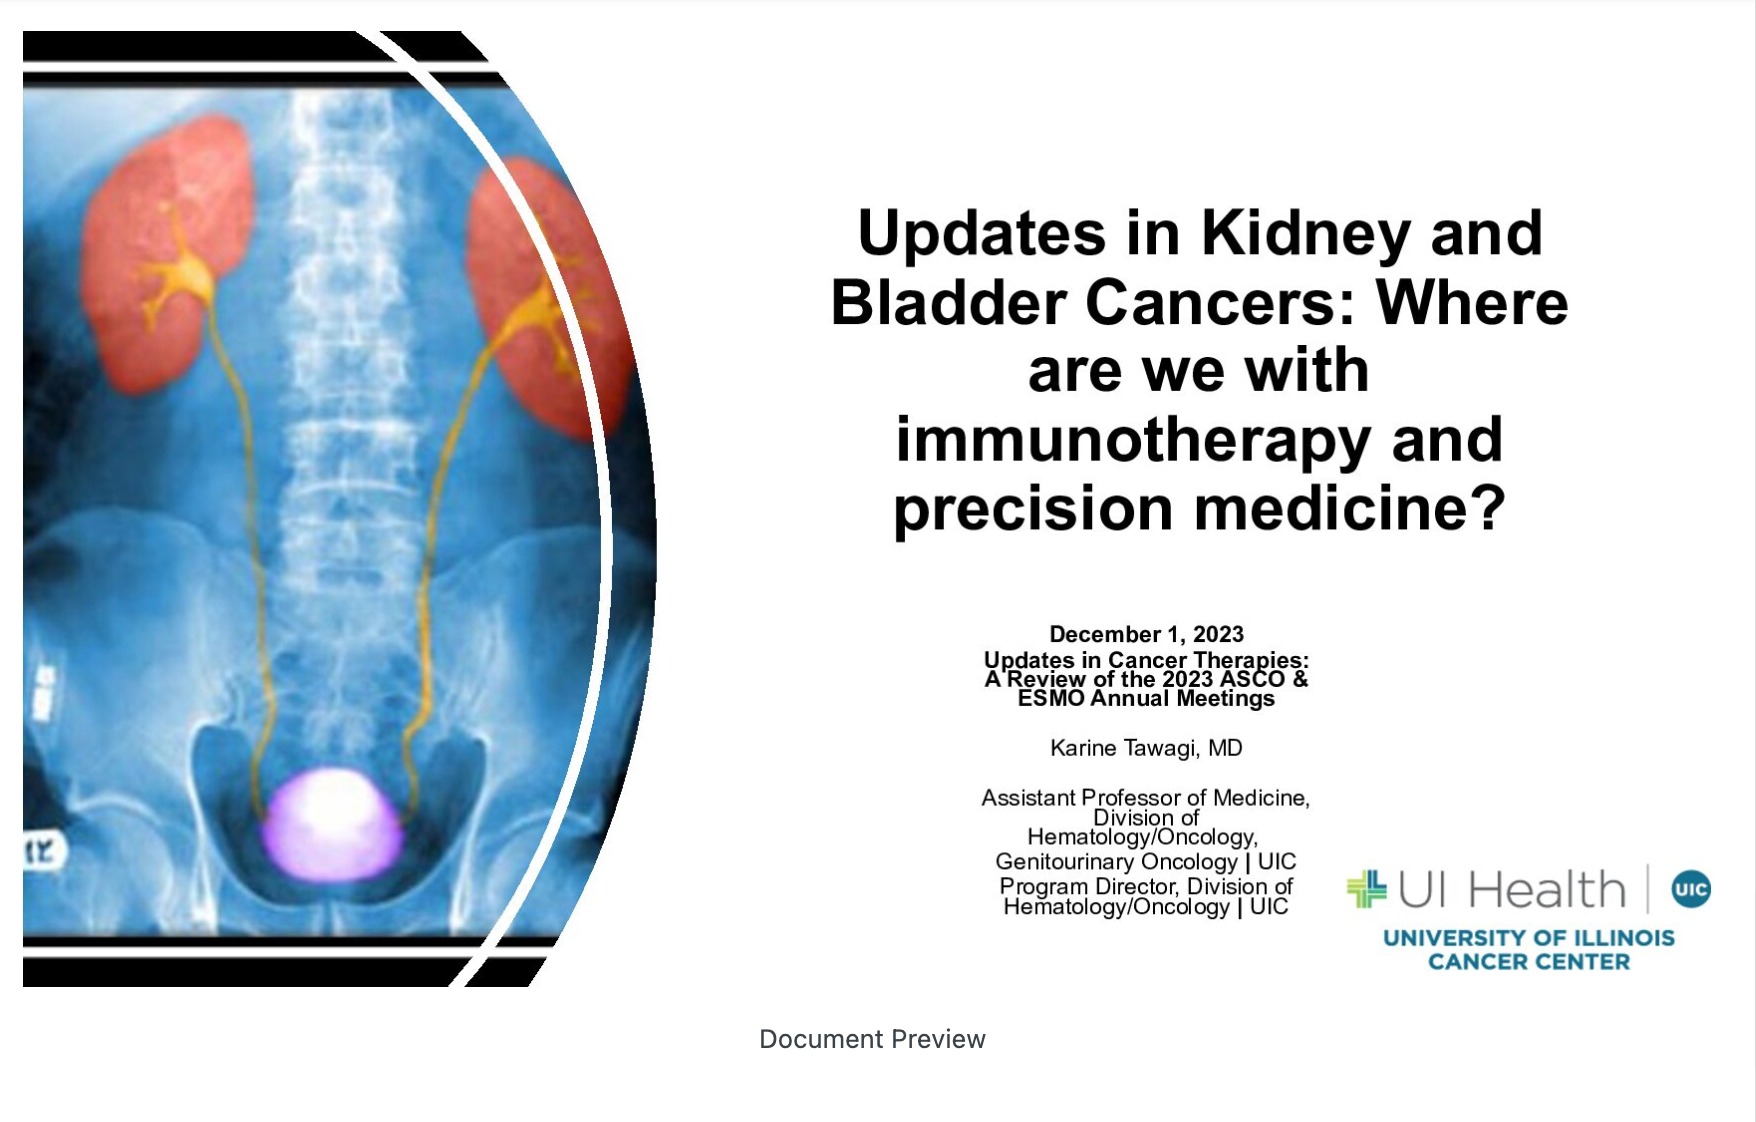 Updates in Kidney and Bladder Cancers: Where we are with Immunotherapy and Precision Medicine?